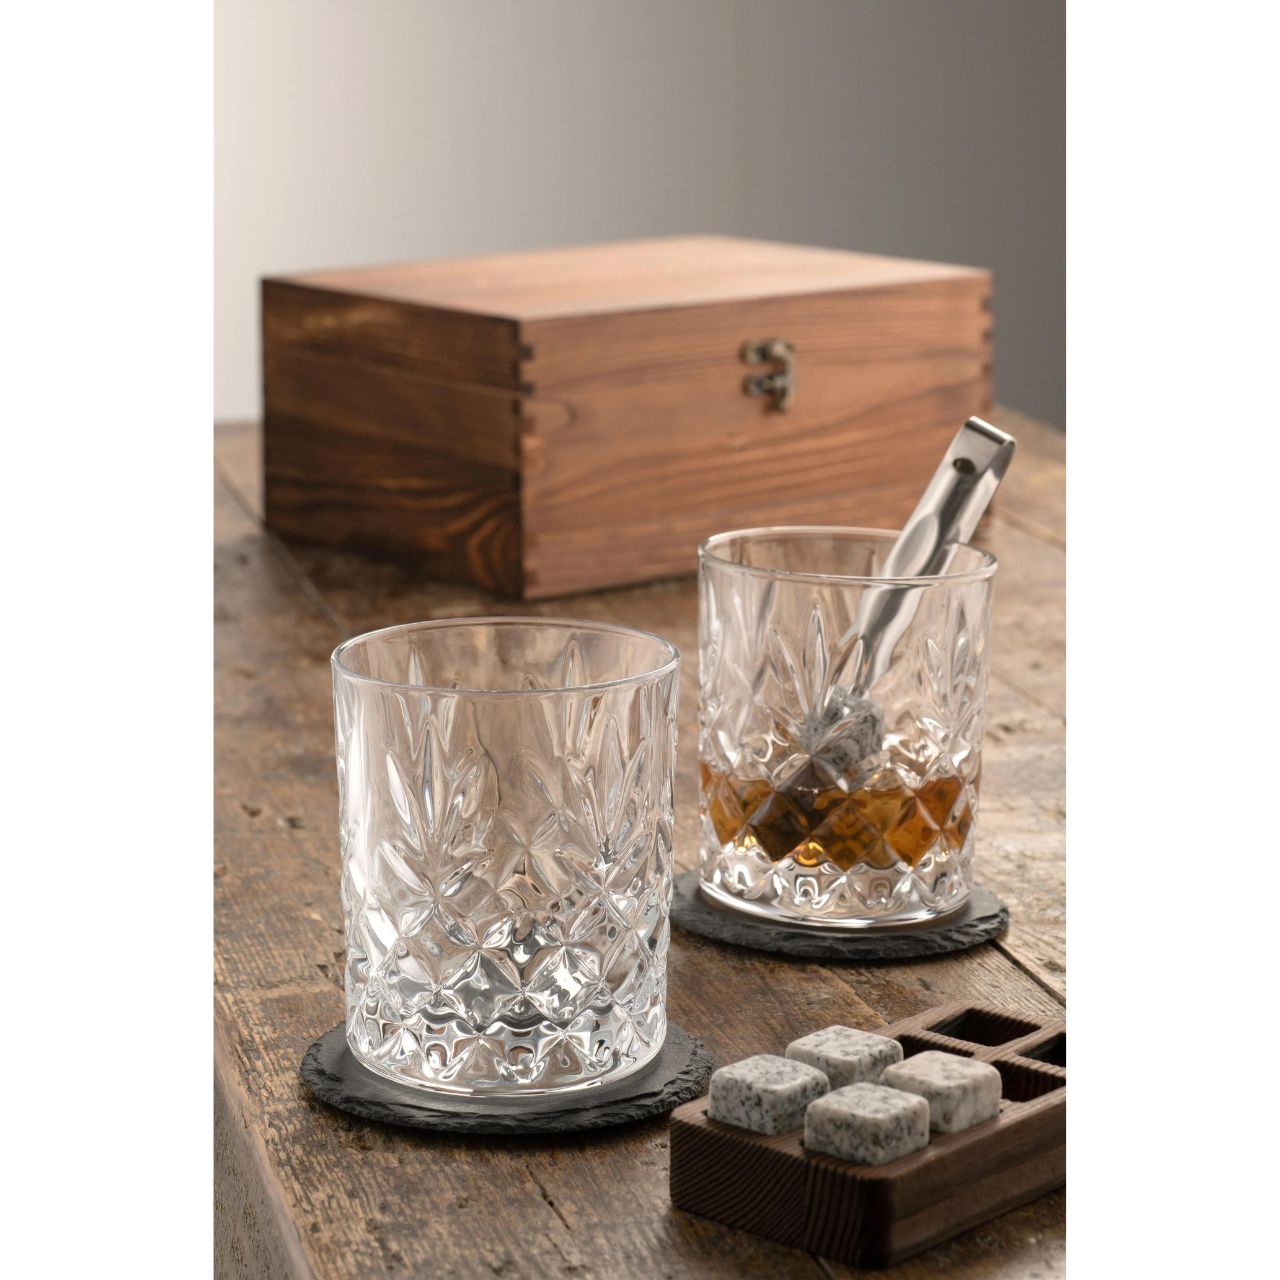 Renmore Wooden Boxed Whiskey Set by Galway Crystal  The Renmore wooden boxed whiskey gift set is the ultimate gift set for any whiskey enthusiast. All whiskey lovers will feel like they are the classiest whiskey drinker around with our stunning set.